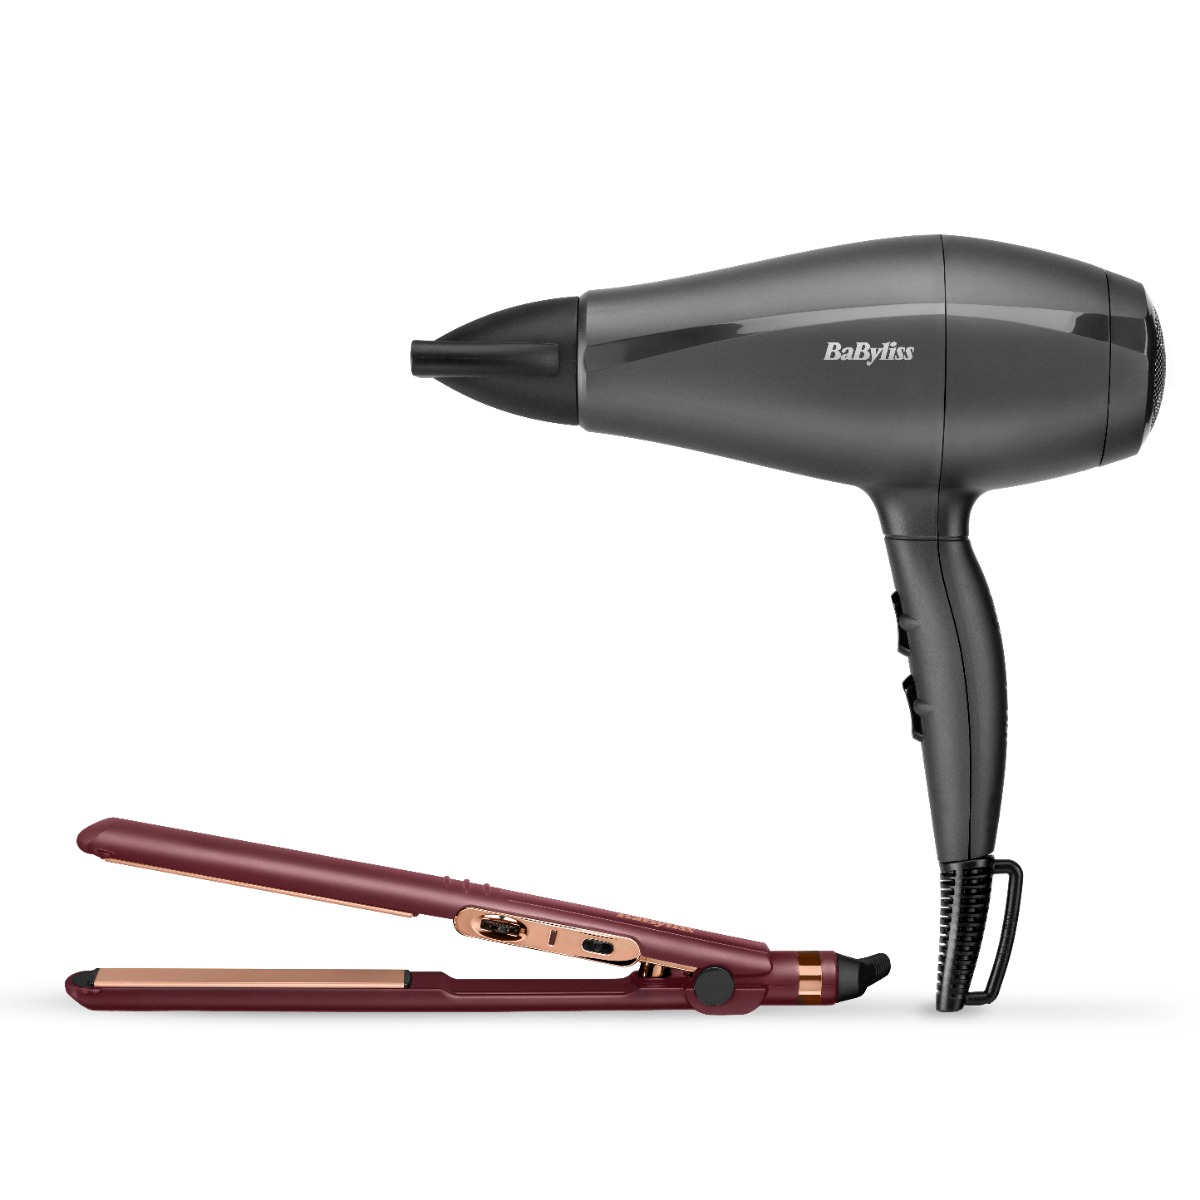 Babyliss Hair Dryer, 2000W, 3 Temperatures, Black - 5910E with Babyliss Berry Crush 230 Hair Straightener, 140-230 Degree, Pink- ST2183PSDE